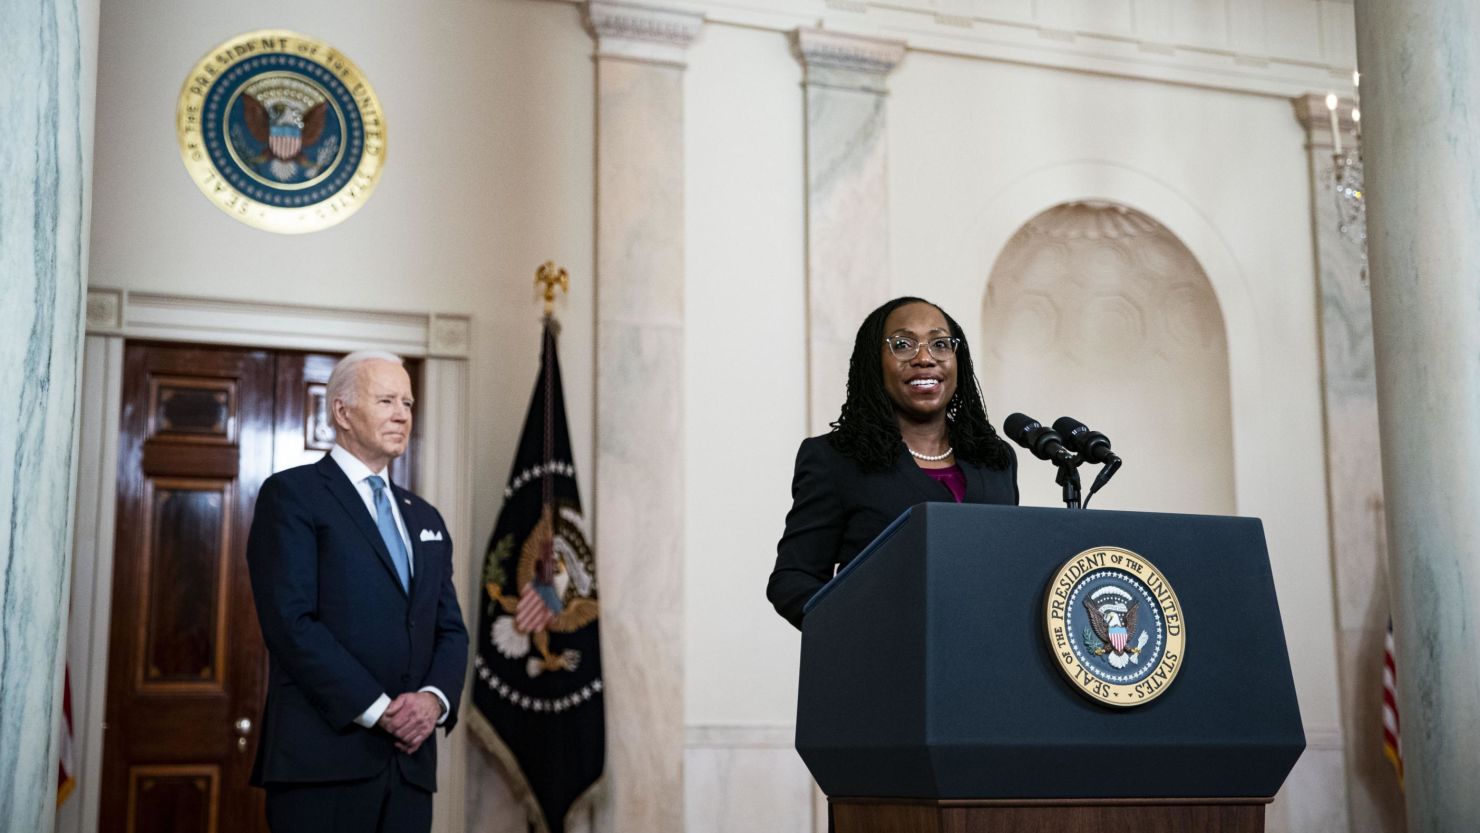 US Supreme Court nominee Ketanji Brown Jackson speaks during an announcement ceremony at the White House with President Joe Biden on February 25, 2022.